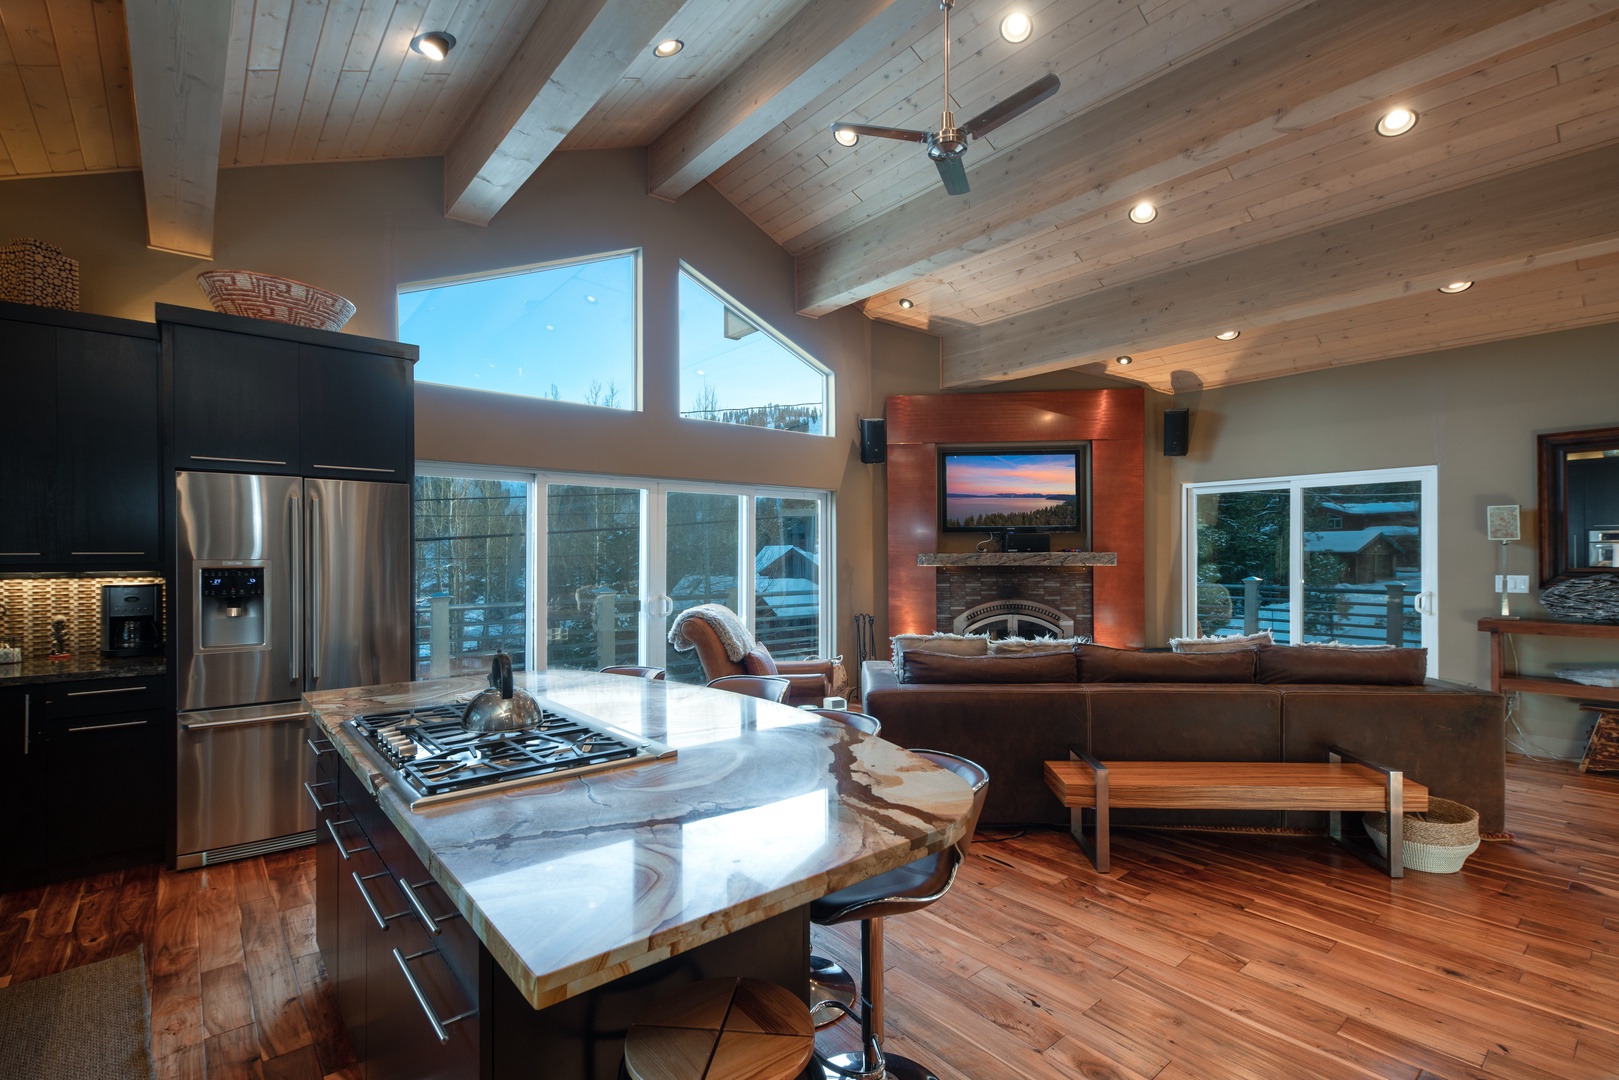 View over kitchen island of living room with fireplace and wall mounted tv: Eagle's Nest Lodge